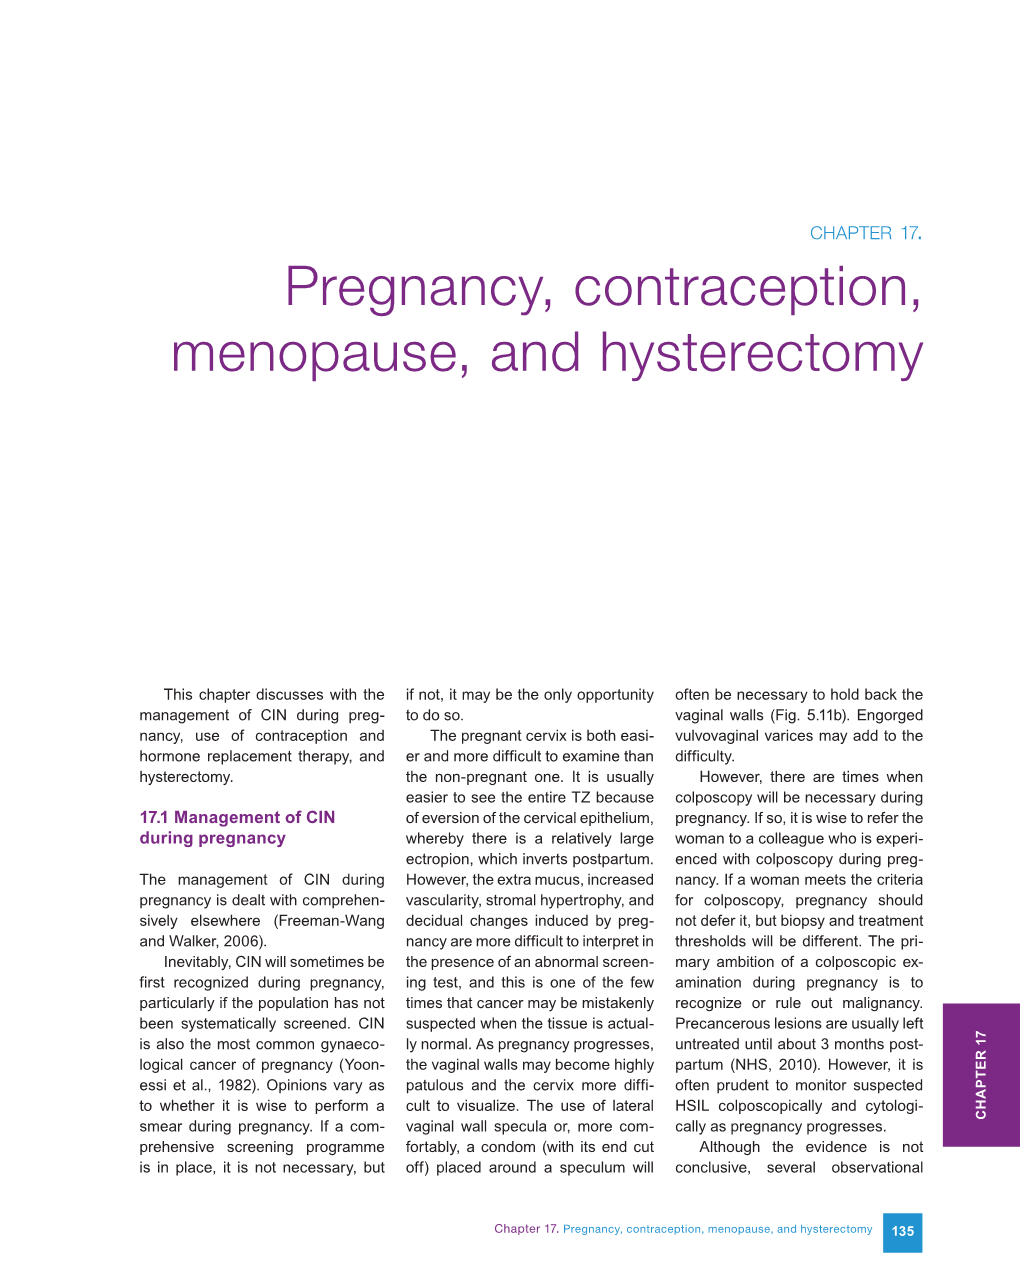 Pregnancy, Contraception, Menopause, and Hysterectomy CHAPTER 1 CHAPTER